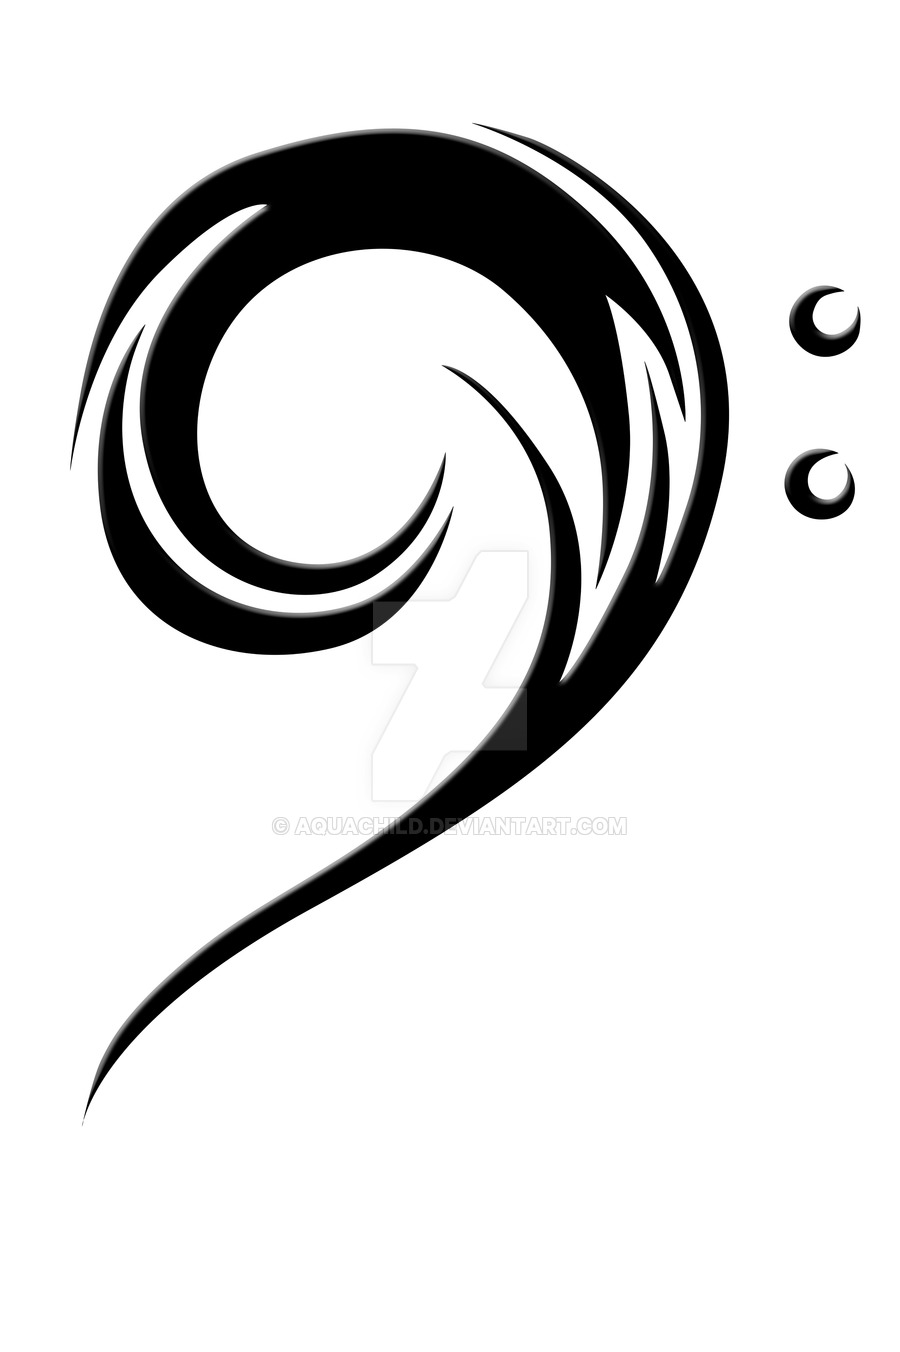 bass clef by aquachild on Clipart library